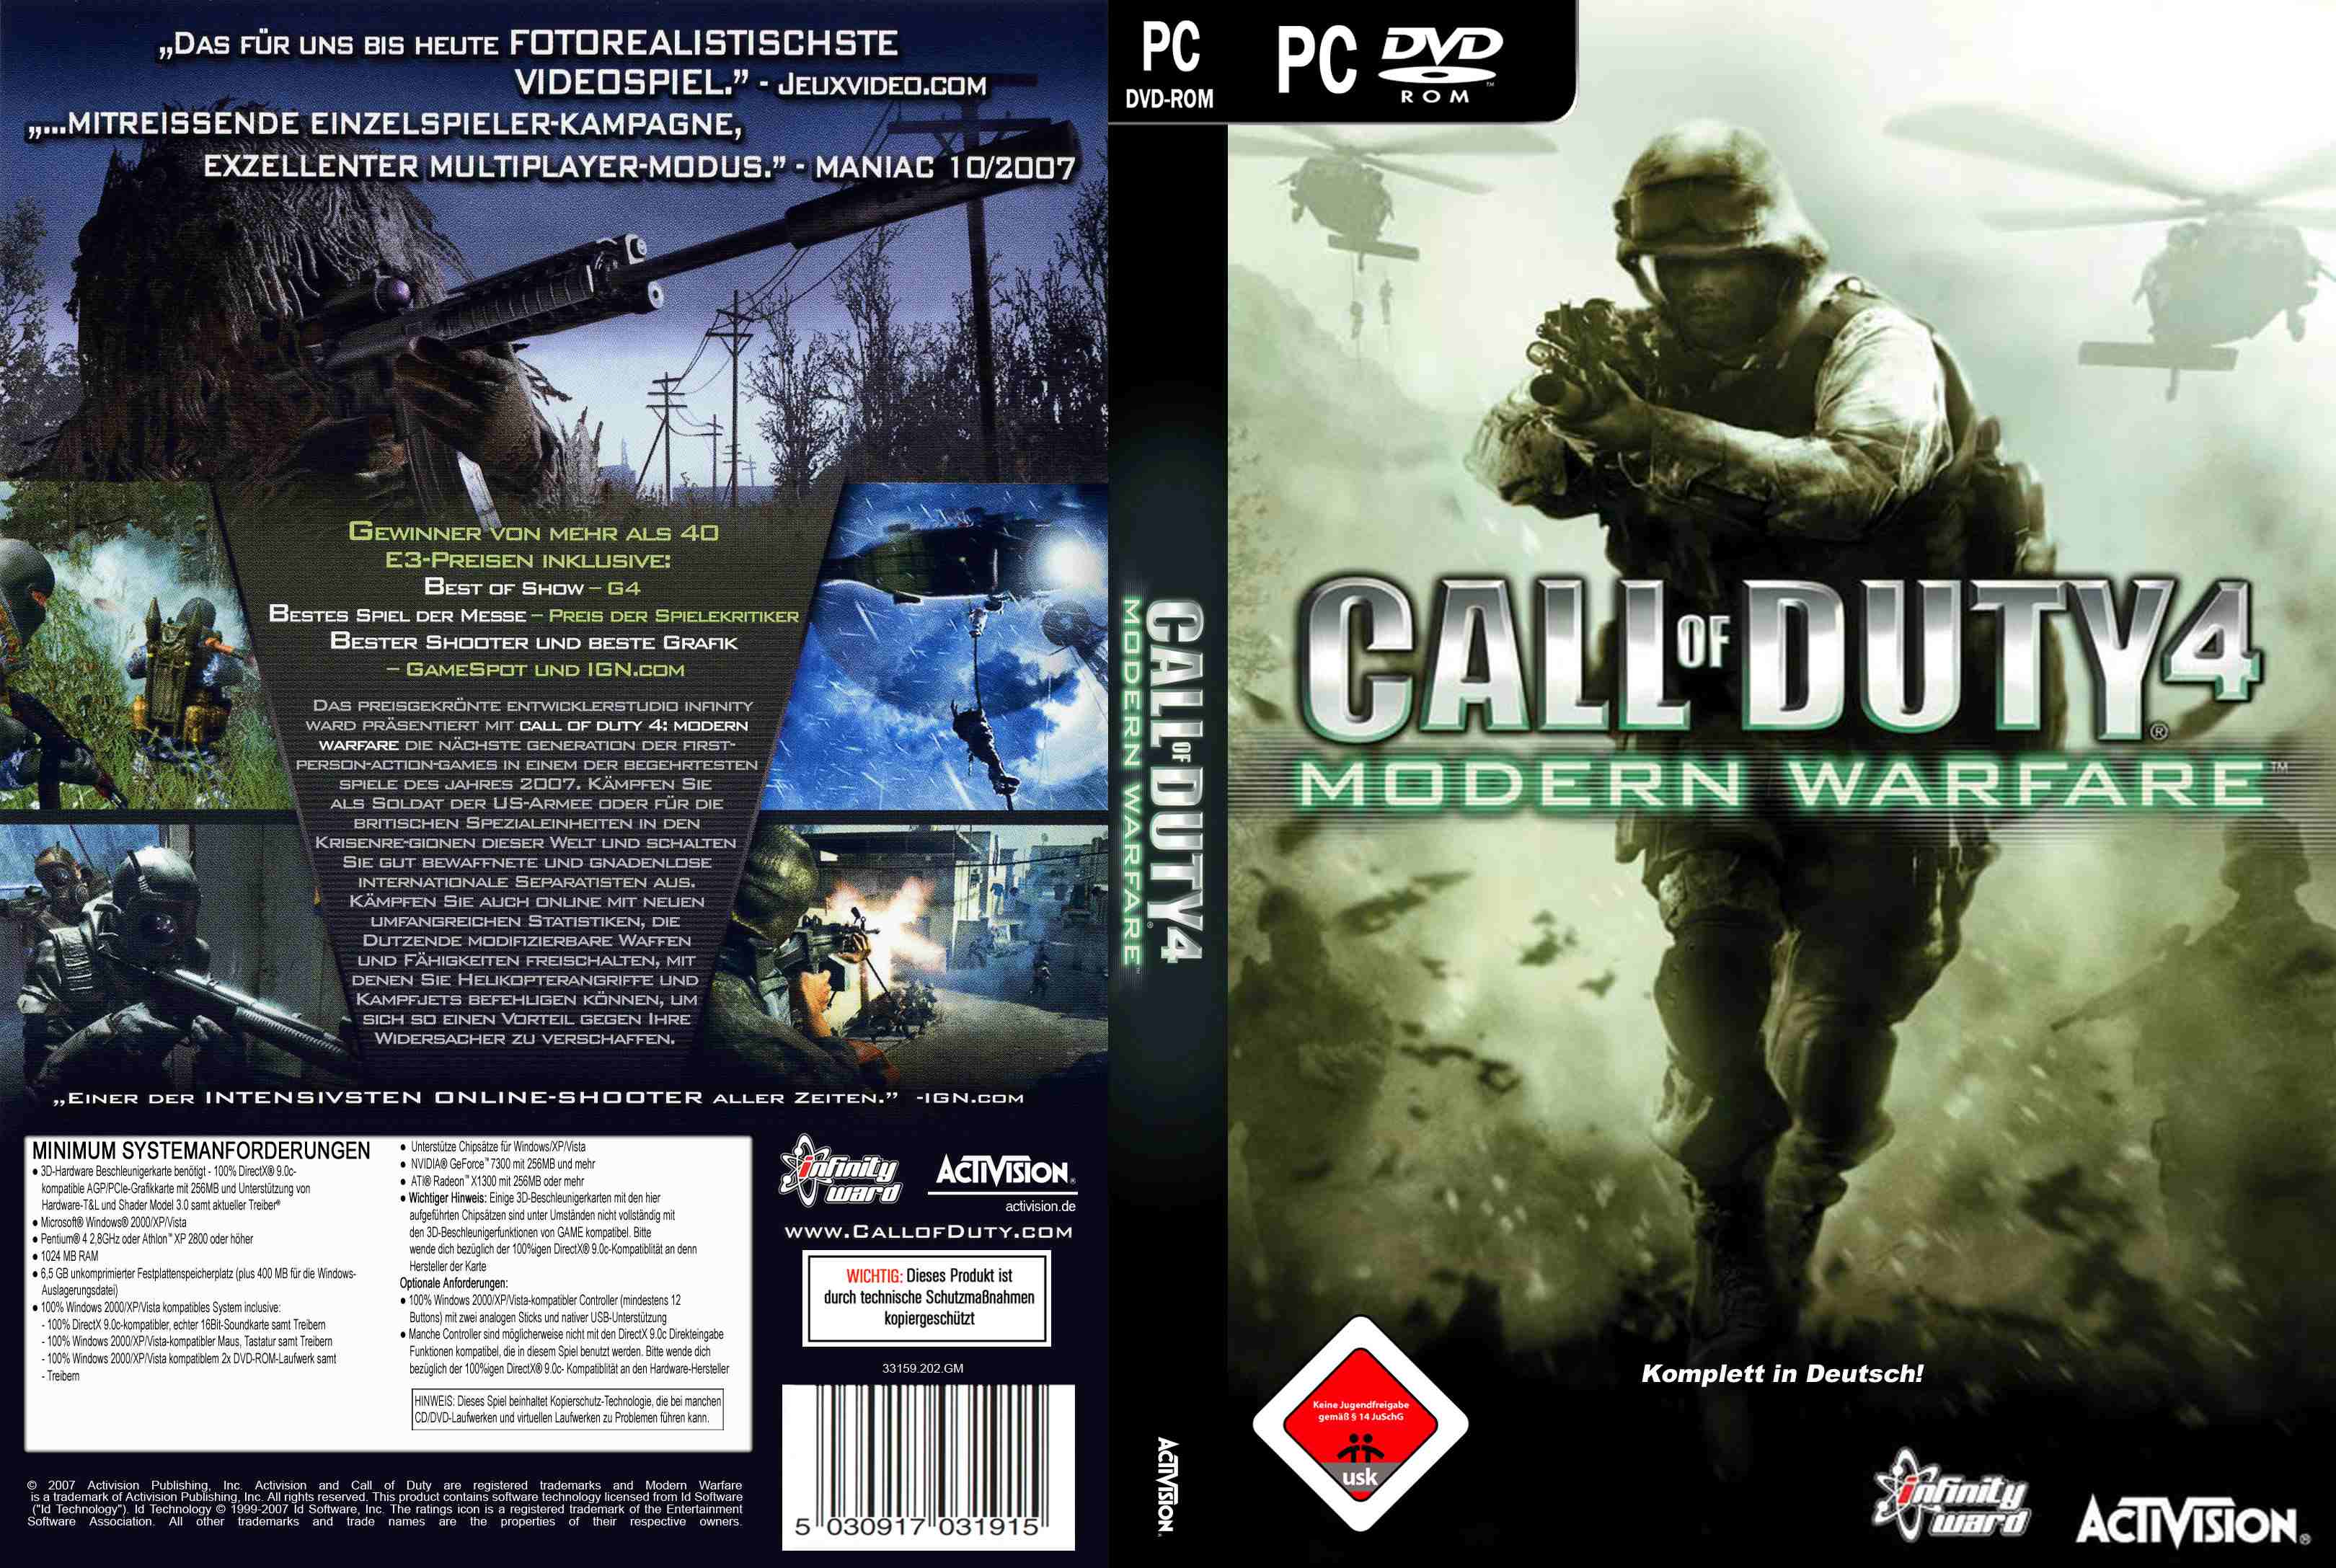 Call Of Duty 4 D Pc Covers Cover Century Over 500 000 Album Art Covers For Free